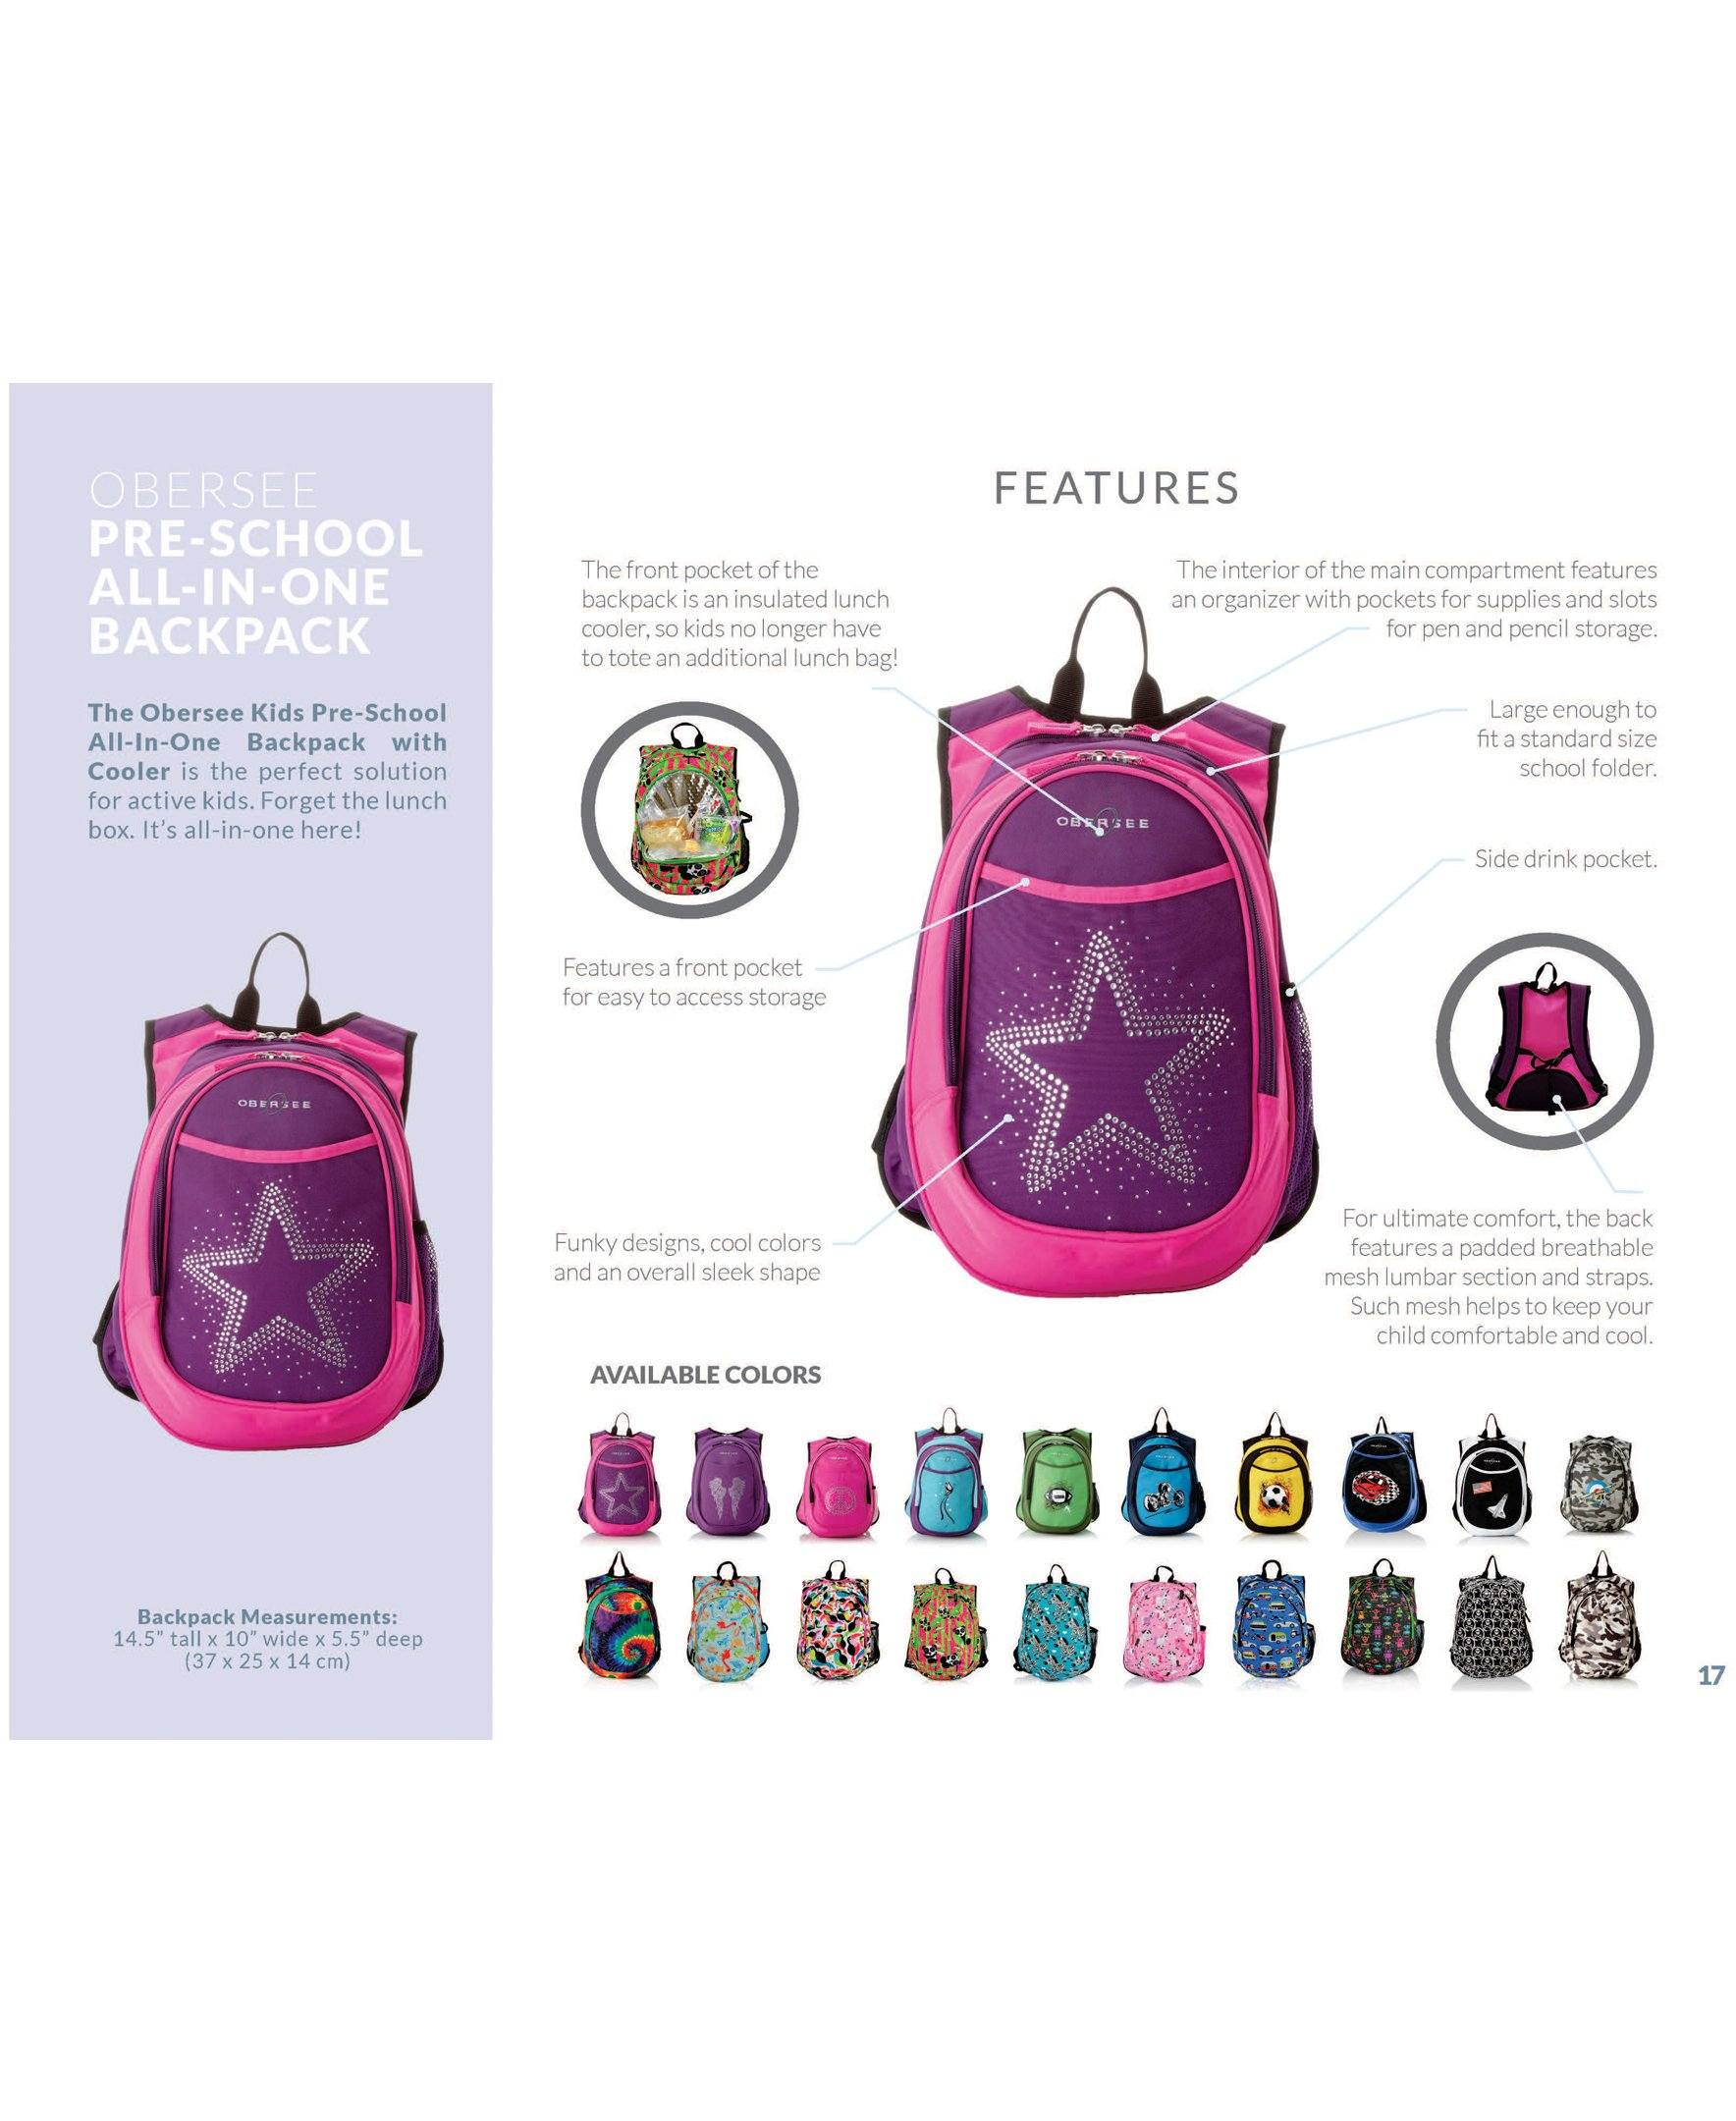 O3KCBP013 Obersee Mini Preschool All-in-One Backpack for Toddlers and Kids with integrated Insulated Cooler | Space - image 3 of 4